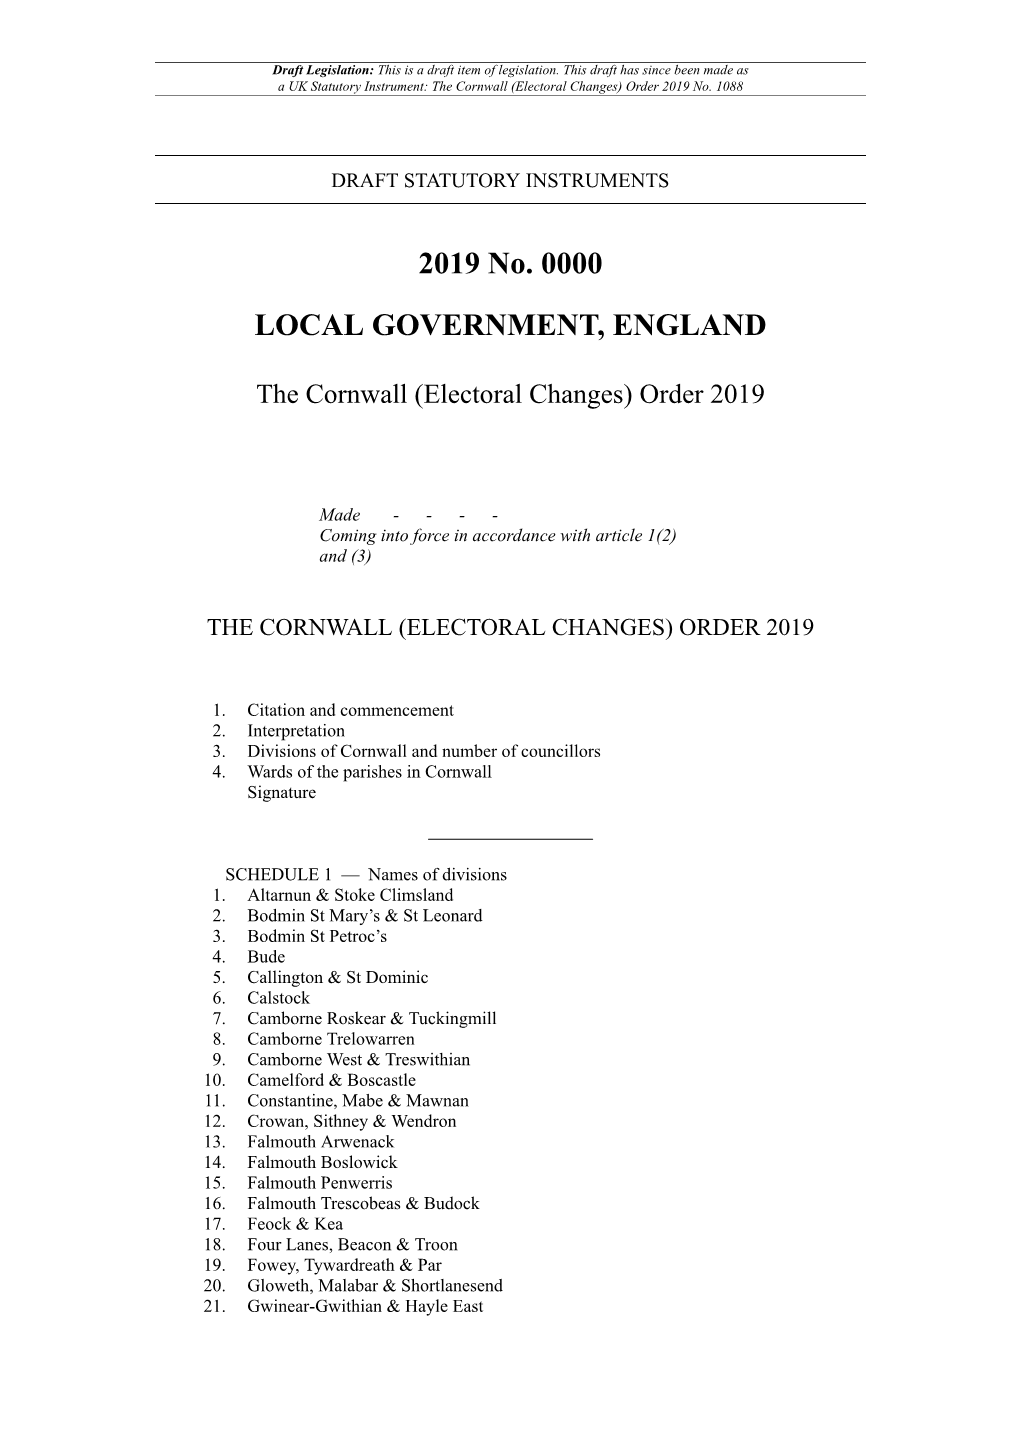 The Cornwall (Electoral Changes) Order 2019 No